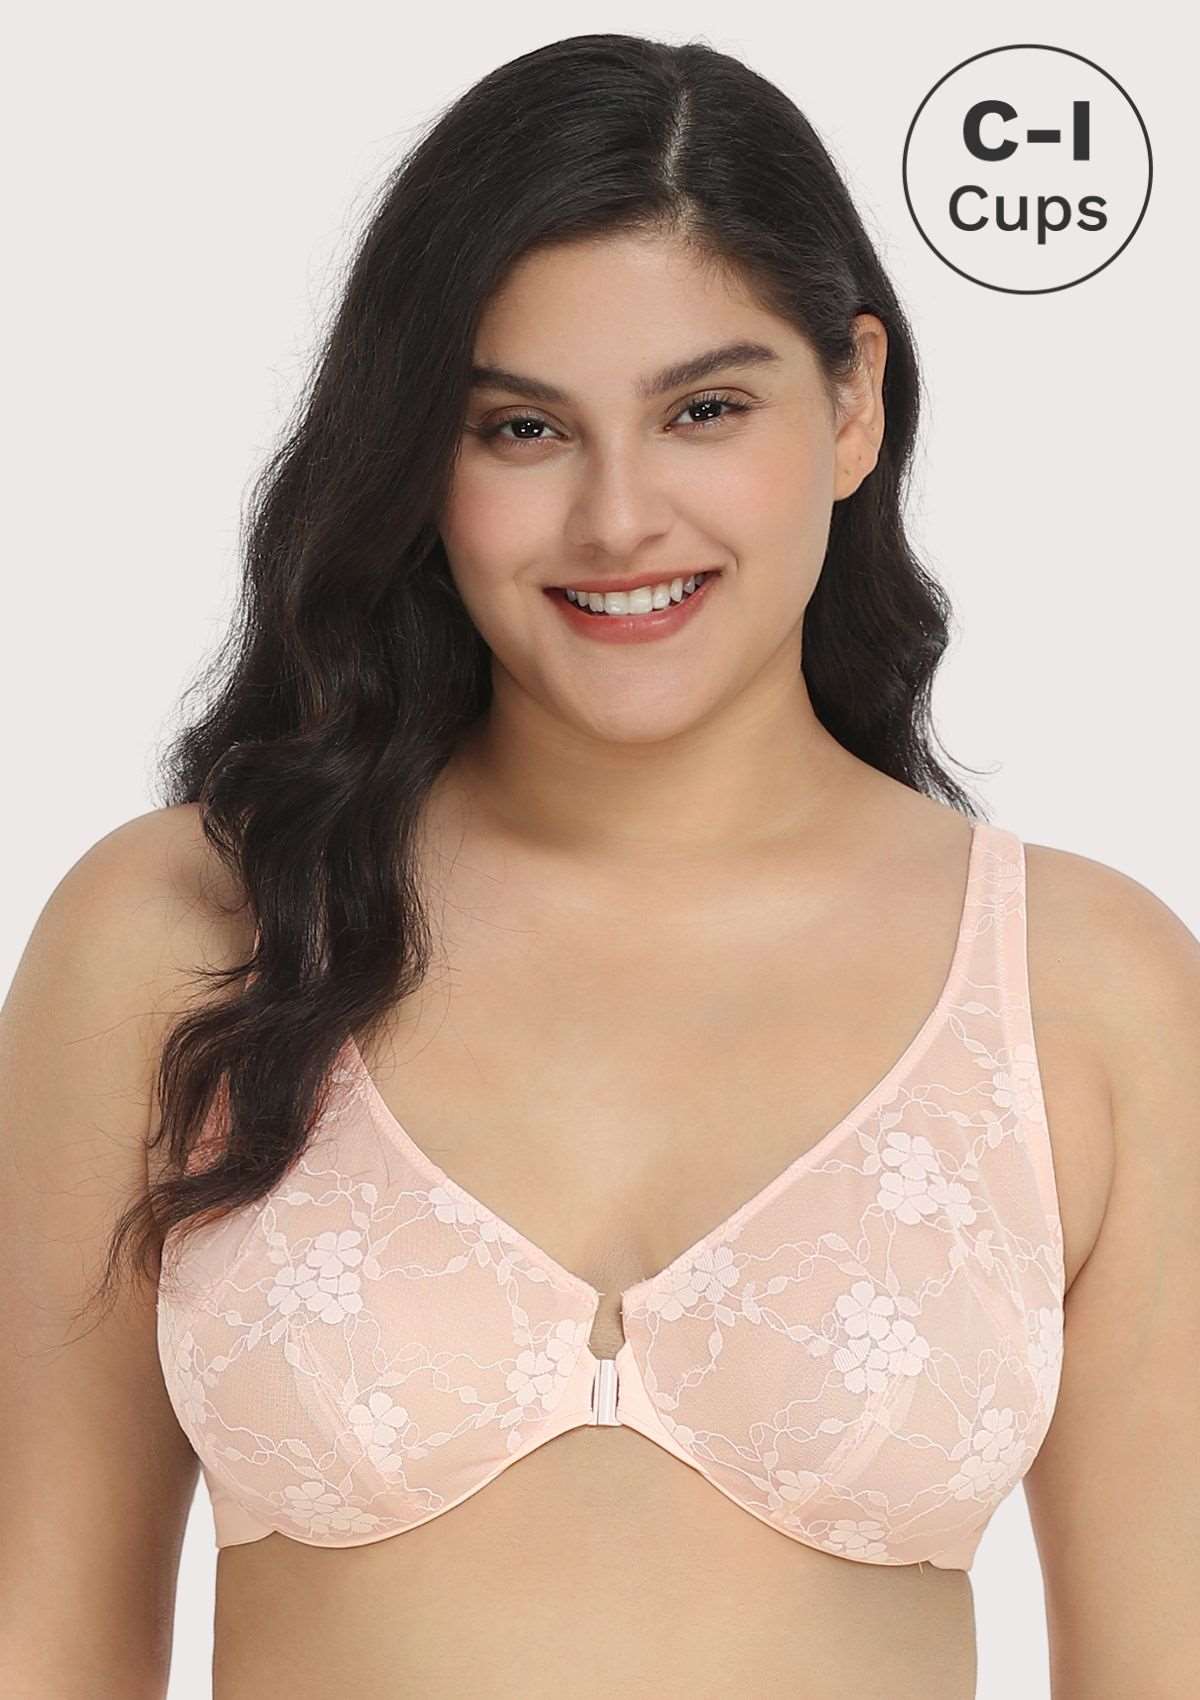 HSIA Spring Romance Front-Close Floral Lace Unlined Full Coverage Bra - Dusty Peach / 34 / D